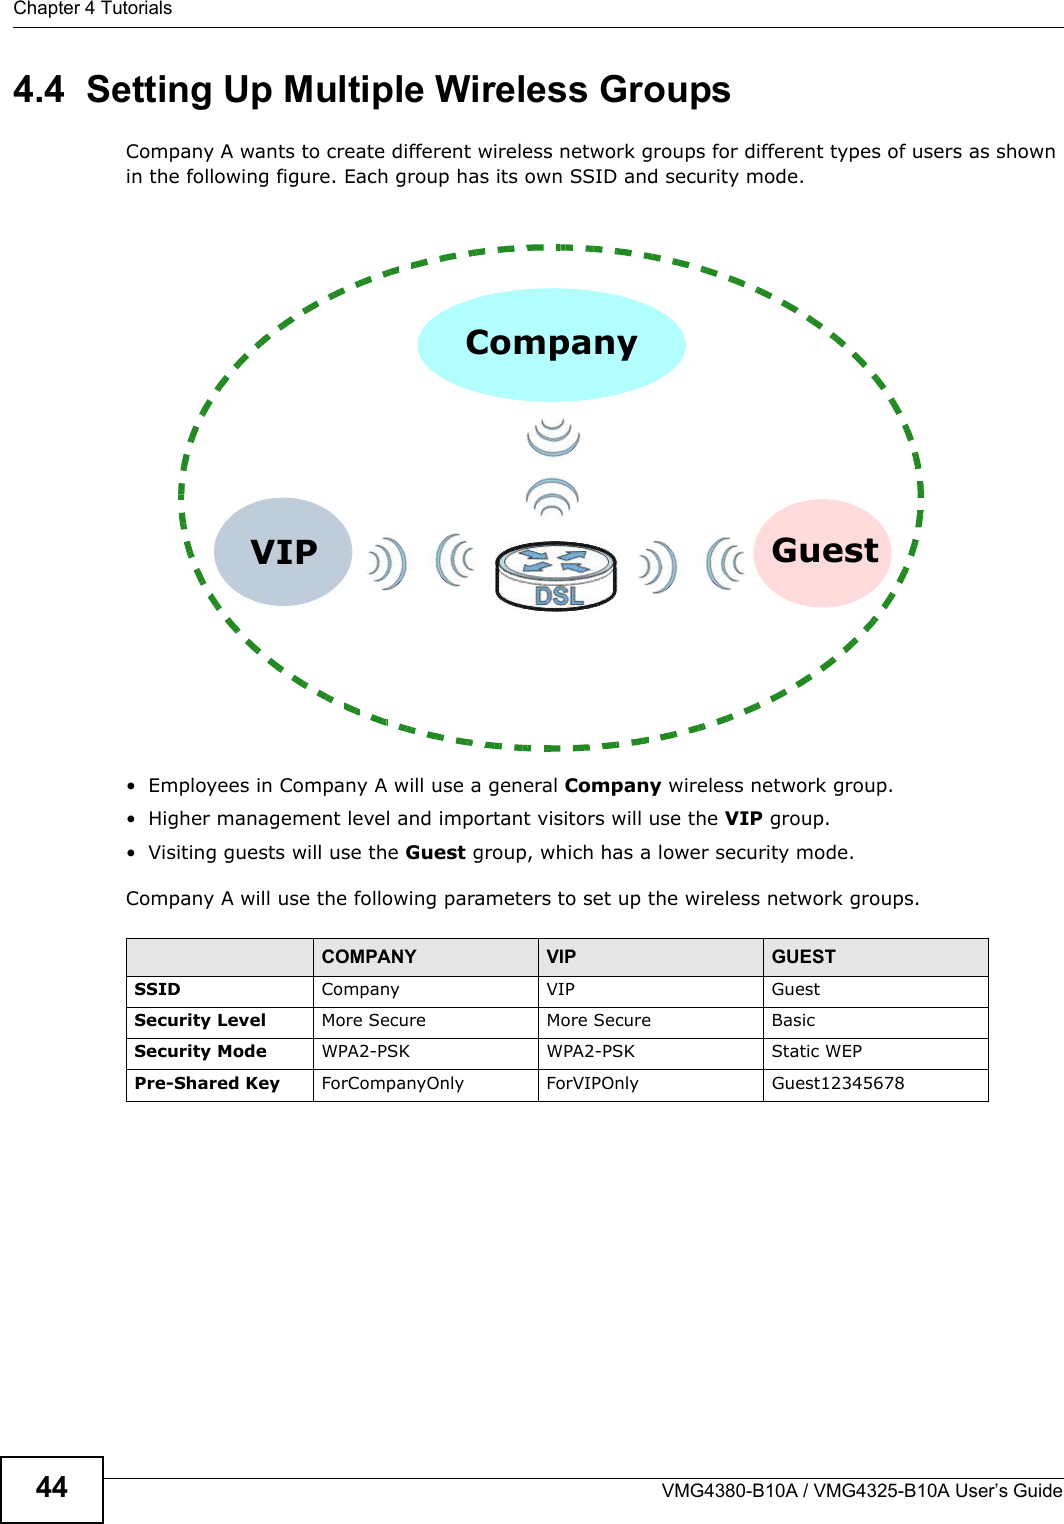 Chapter 4 TutorialsVMG4380-B10A / VMG4325-B10A User’s Guide444.4  Setting Up Multiple Wireless GroupsCompany A wants to create different wireless network groups for different types of users as shown in the following figure. Each group has its own SSID and security mode.• Employees in Company A will use a general Company wireless network group.• Higher management level and important visitors will use the VIP group.• Visiting guests will use the Guest group, which has a lower security mode.Company A will use the following parameters to set up the wireless network groups.COMPANY VIP GUESTSSID Company VIP GuestSecurity Level More Secure More Secure BasicSecurity Mode WPA2-PSK WPA2-PSK Static WEPPre-Shared Key ForCompanyOnly ForVIPOnly Guest12345678CompanyVIP Guest